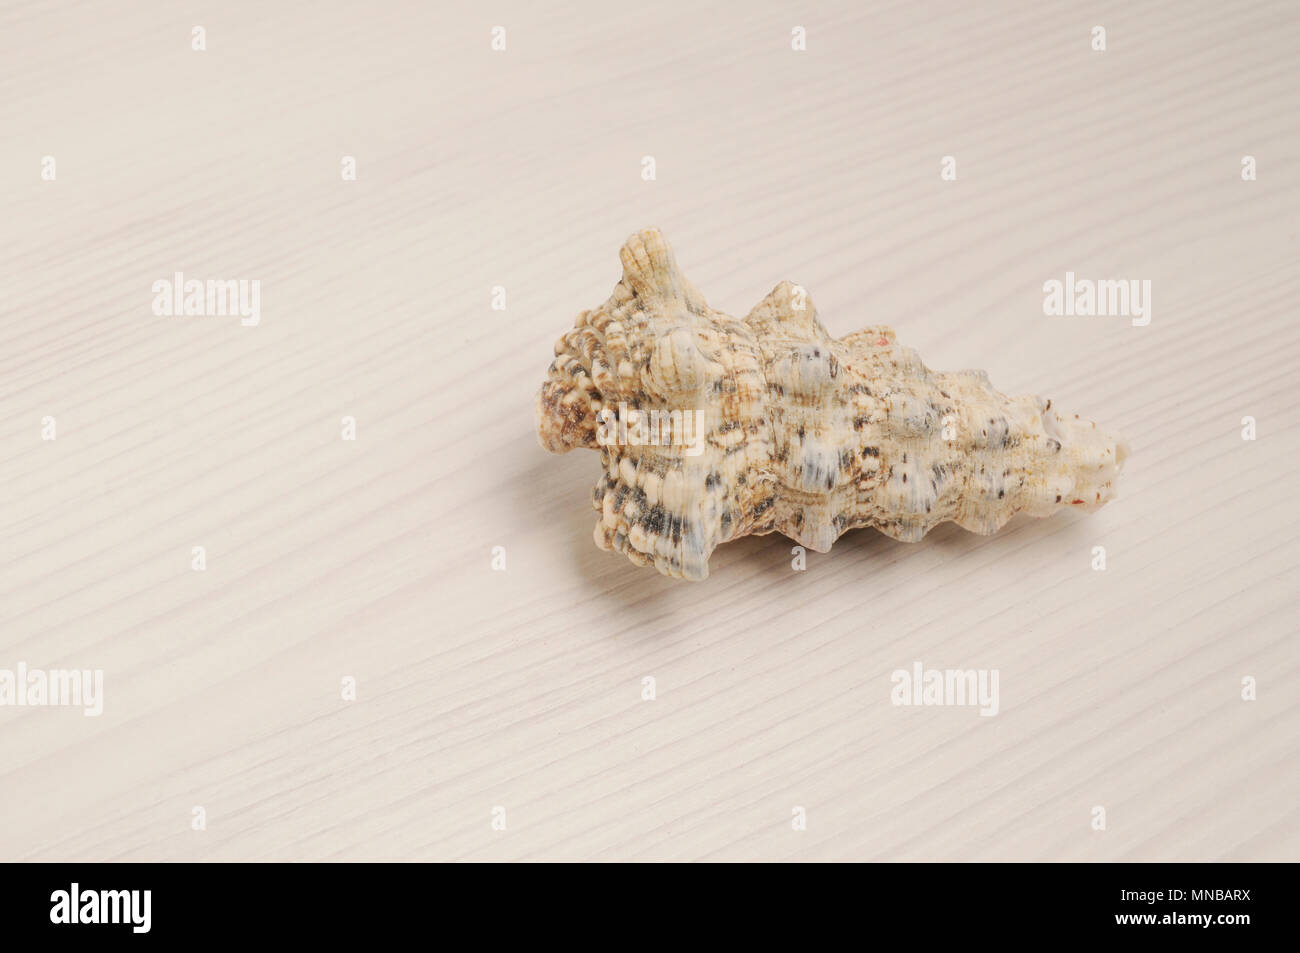 Seashell closeup on white wooden background with copy space Stock Photo